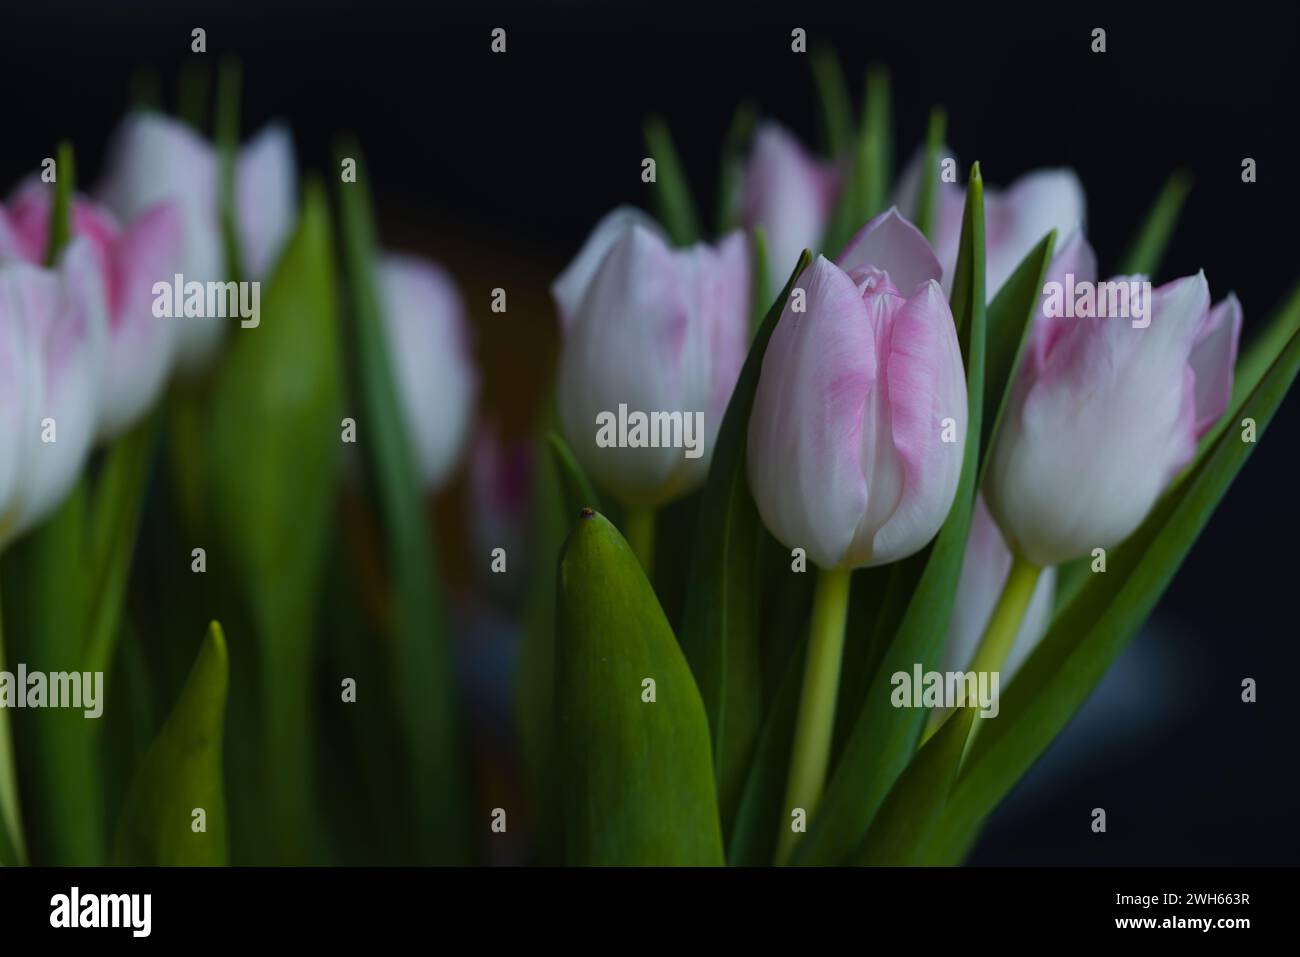 Beautiful arrangement of fresh white-pink tulips in a vase. Photo with shallow depth of field, creating a blurred background. Stock Photo